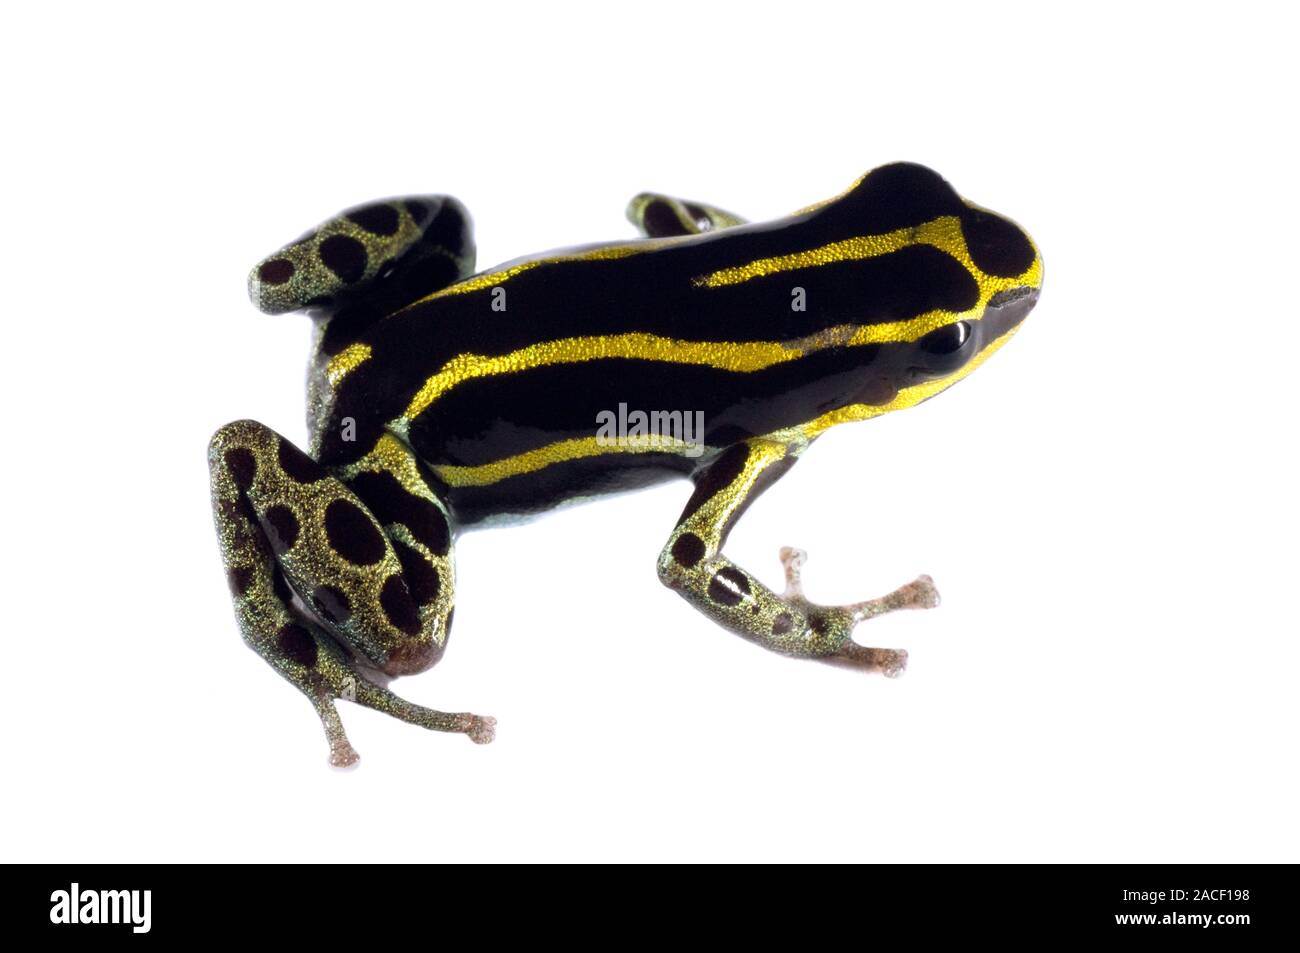 Poison dart frog (family Dendrobatidae). This frog, also known as the poison arrow frog, is a tree climber found in tropical regions of Central and So Stock Photo